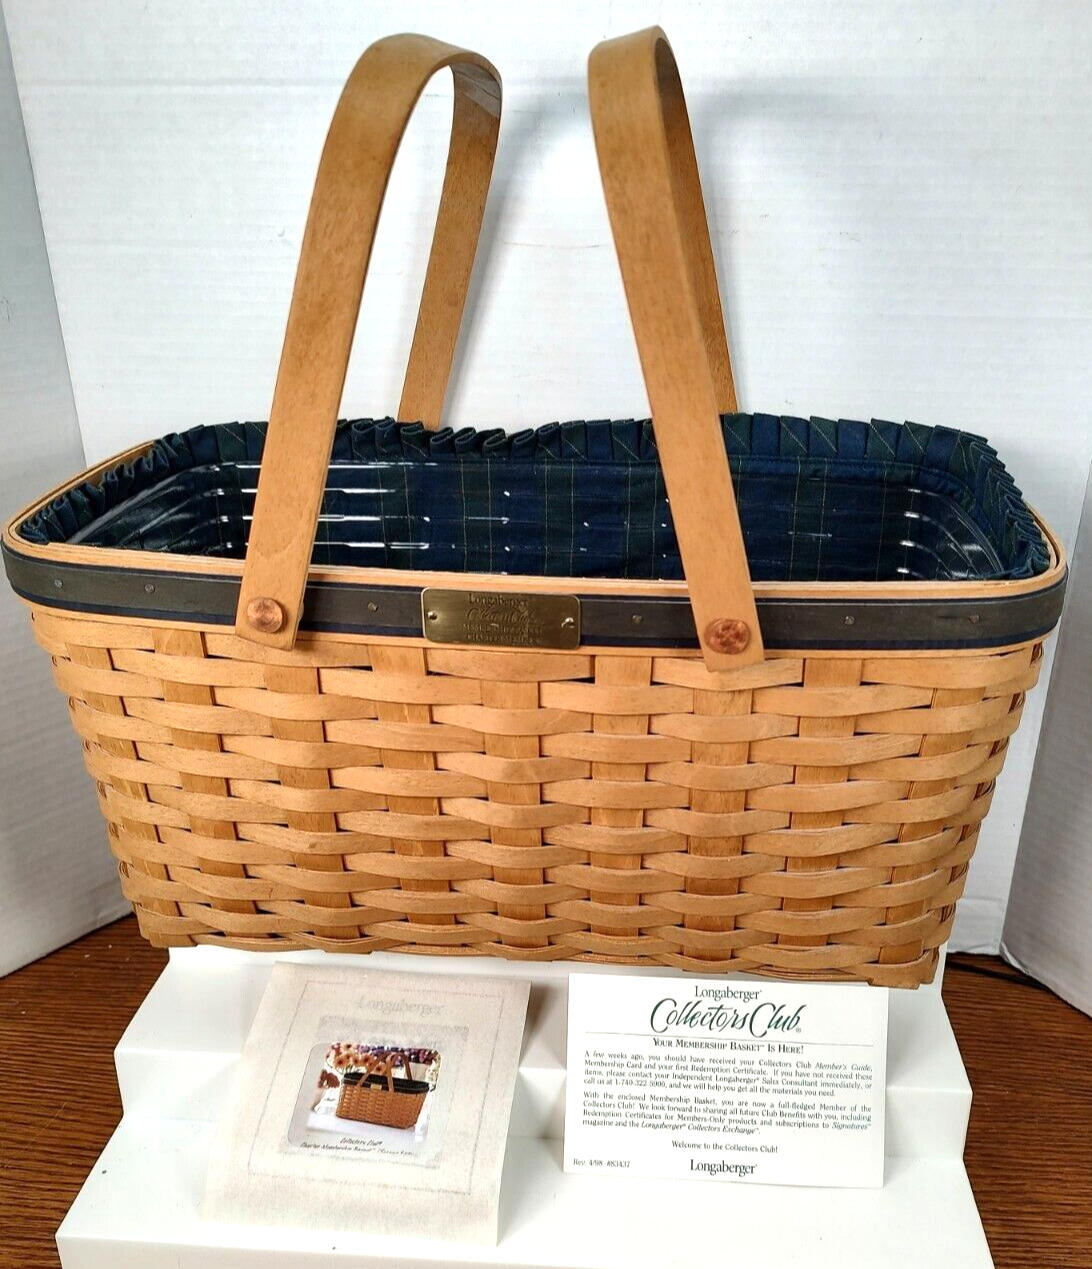 Longaberger Collector Club 2003 Second Edition Charter Membership Combo Basket